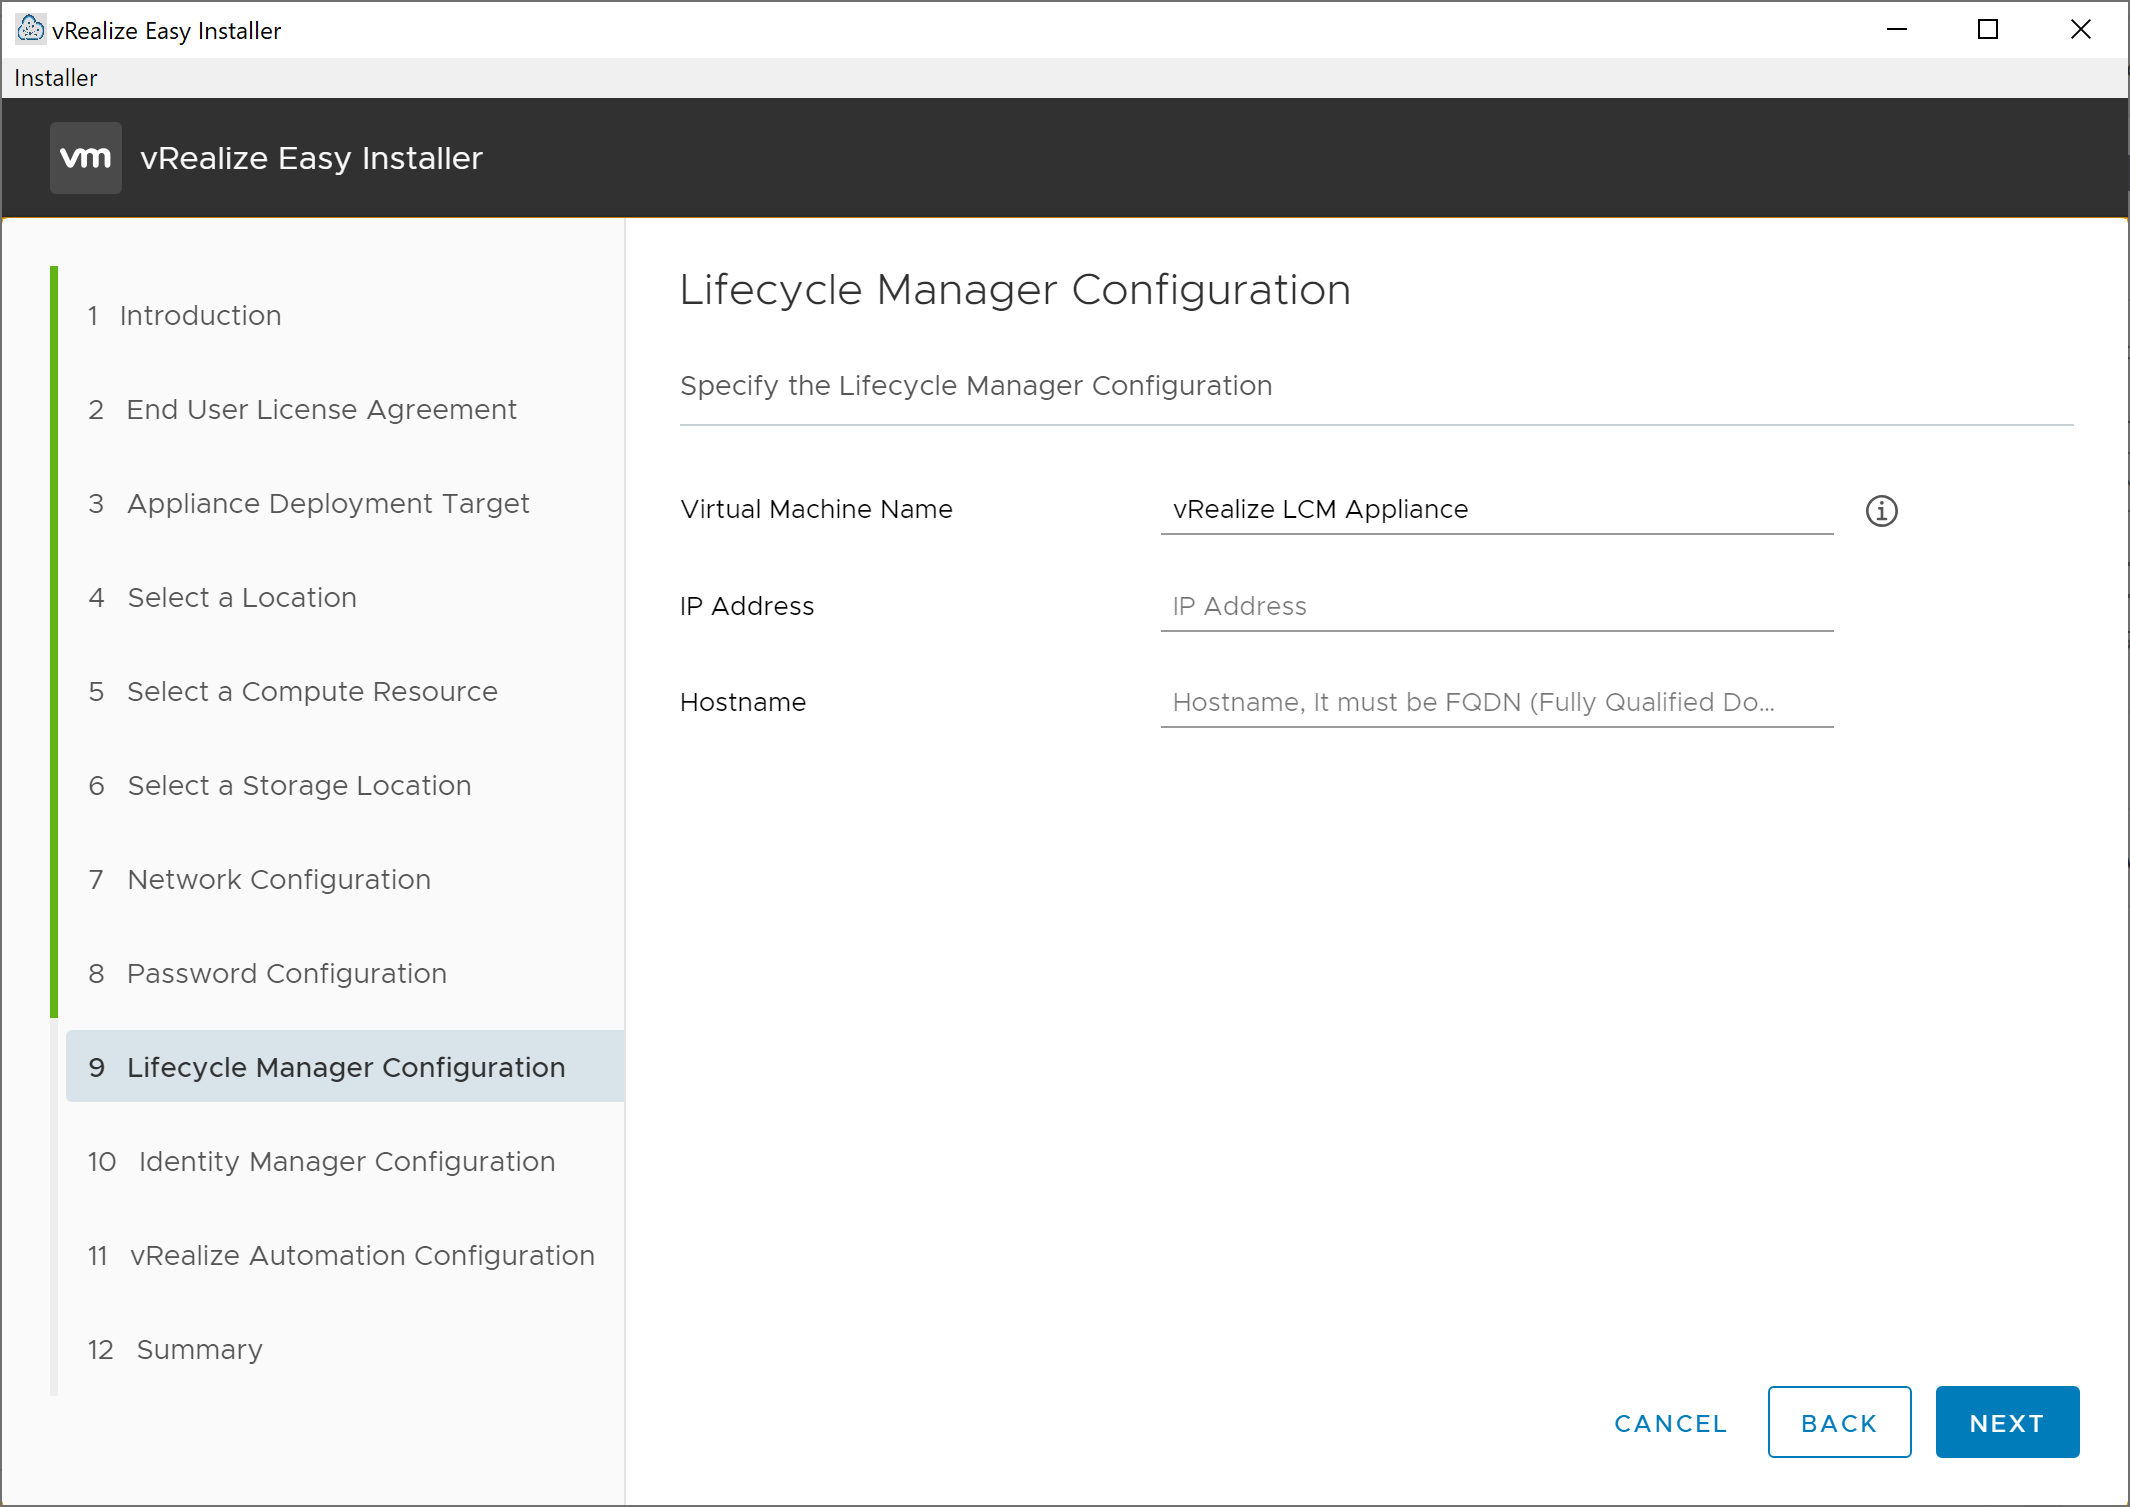 vRealize Easy Installer - New Install - Lifecycle Manager Configuration